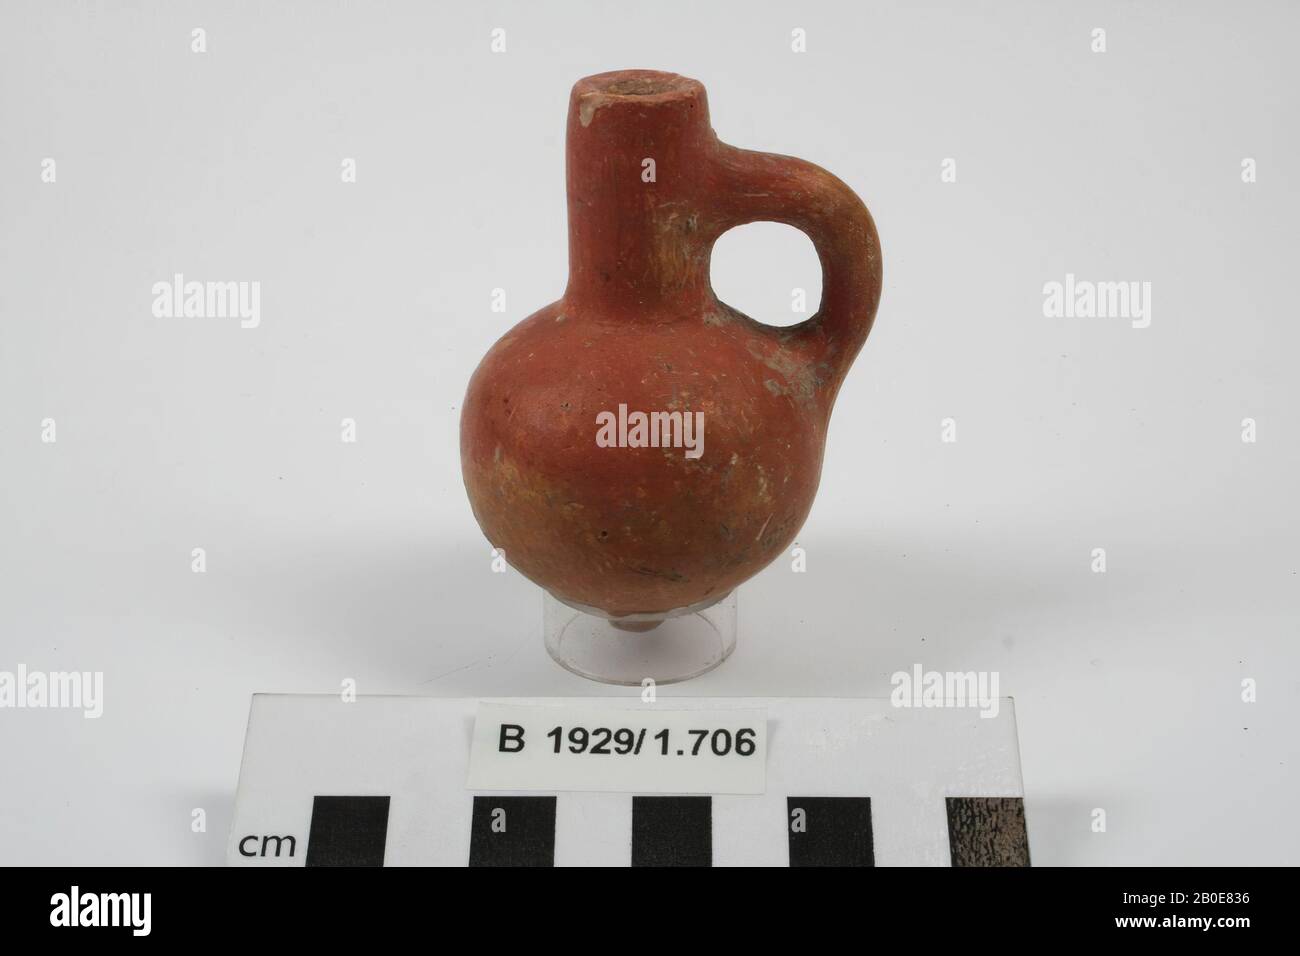 A small earthenware jug with a straight neck, one earpiece and a bulbous body. The object is red slippled and polished., Crockery, pottery, H 8.2 cm, D 5.5 cm, Iron Age II 925-539 BC, Palestine Stock Photo